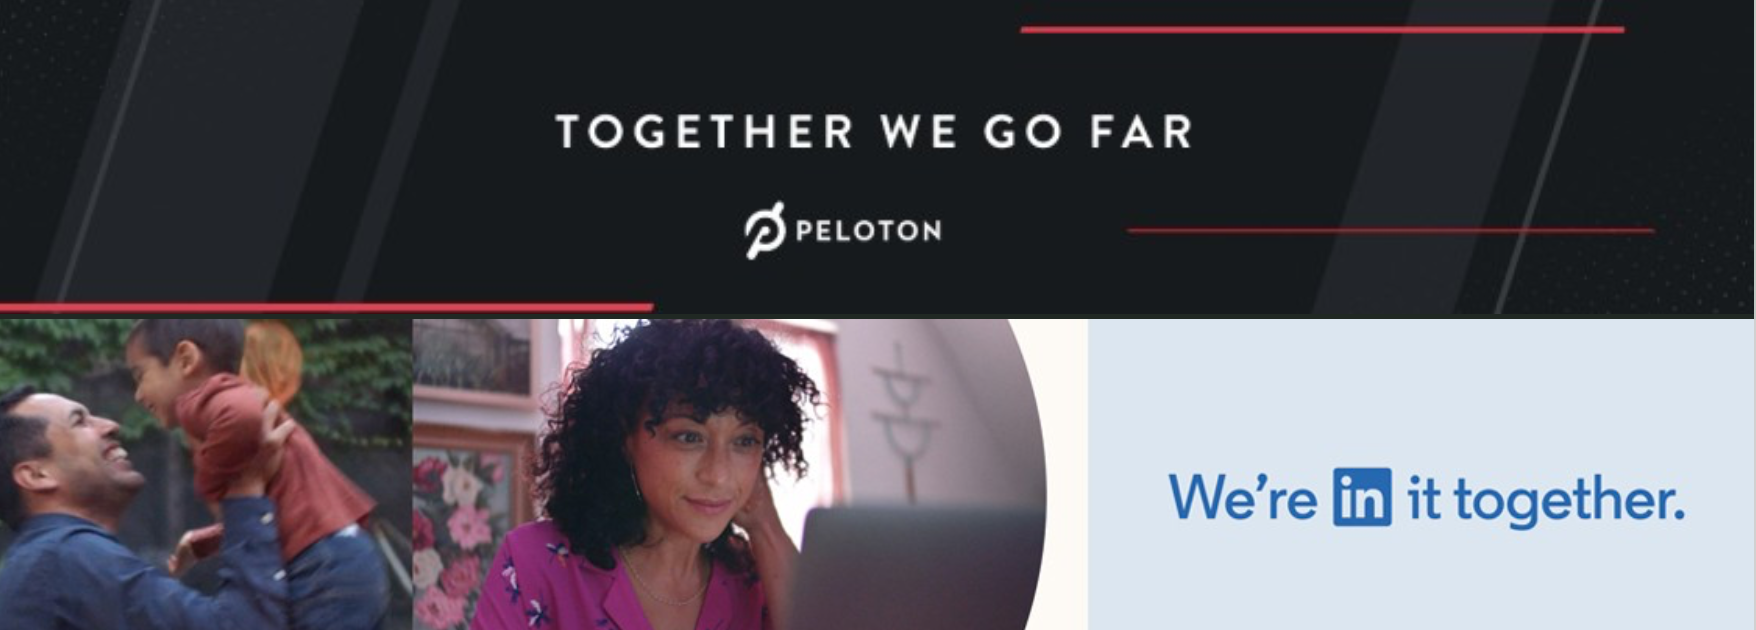 A banner that says together we go far and the Peloton logo is above a banner that says We're in it together.